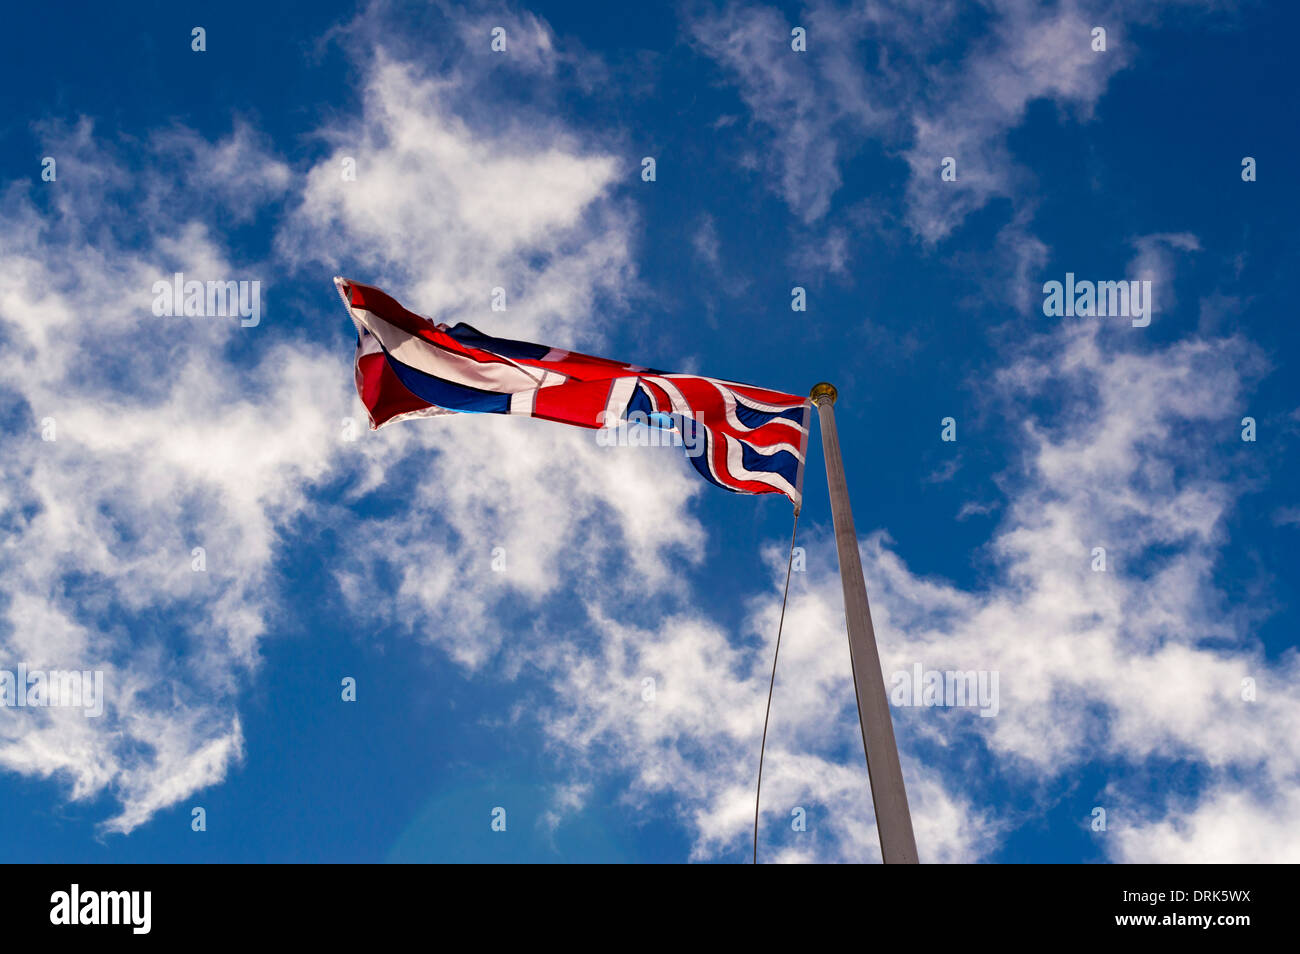 Union Jack flag blowing in wind seen from below Stock Photo